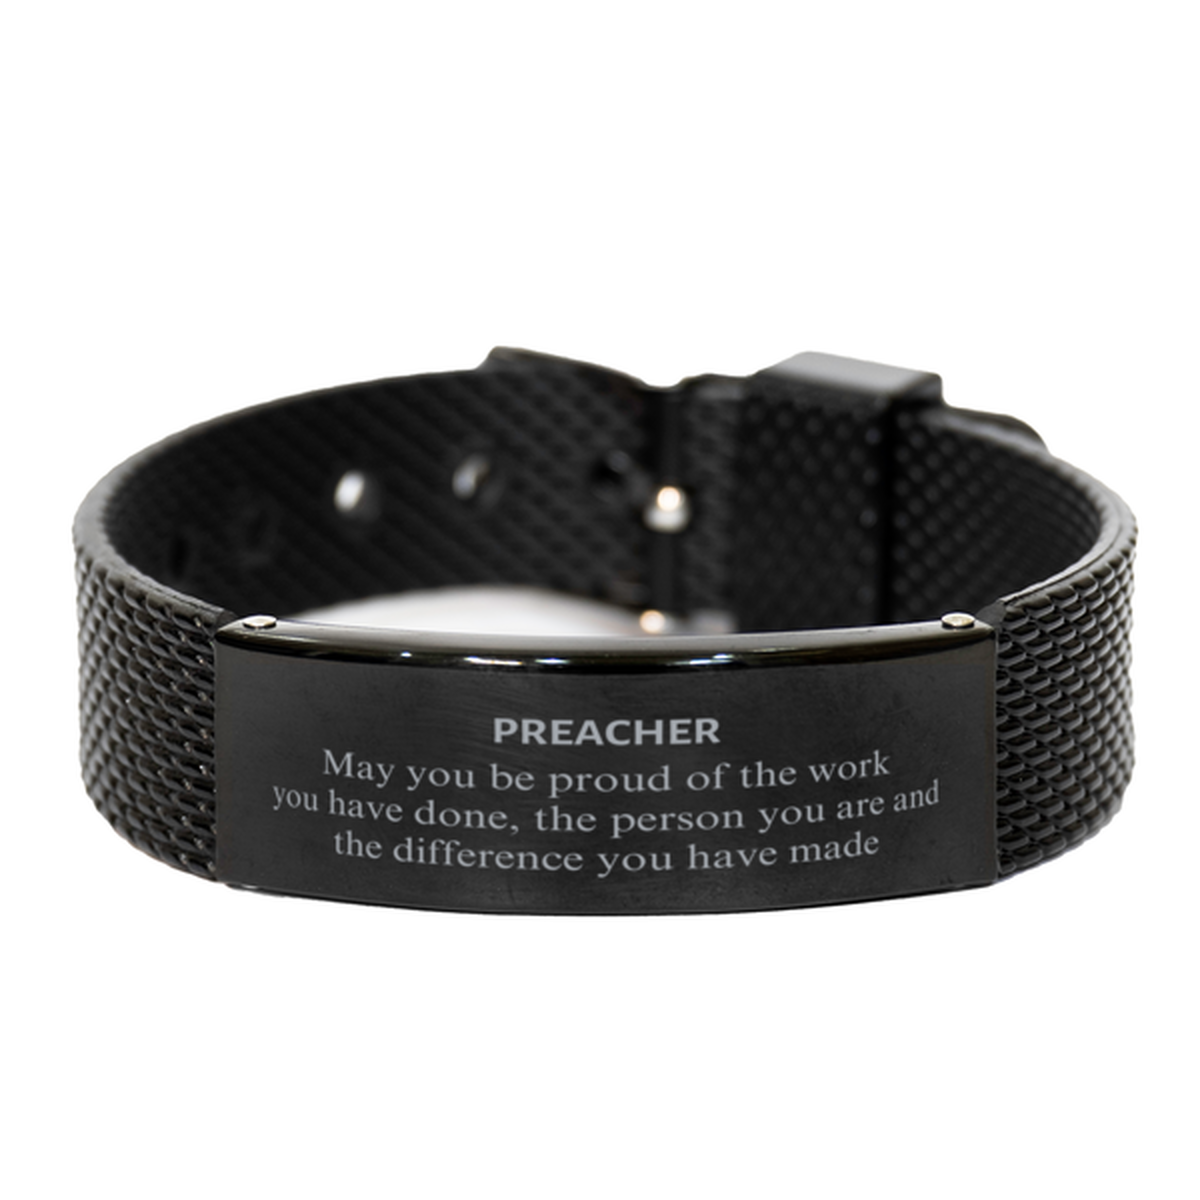 Preacher May you be proud of the work you have done, Retirement Preacher Black Shark Mesh Bracelet for Colleague Appreciation Gifts Amazing for Preacher